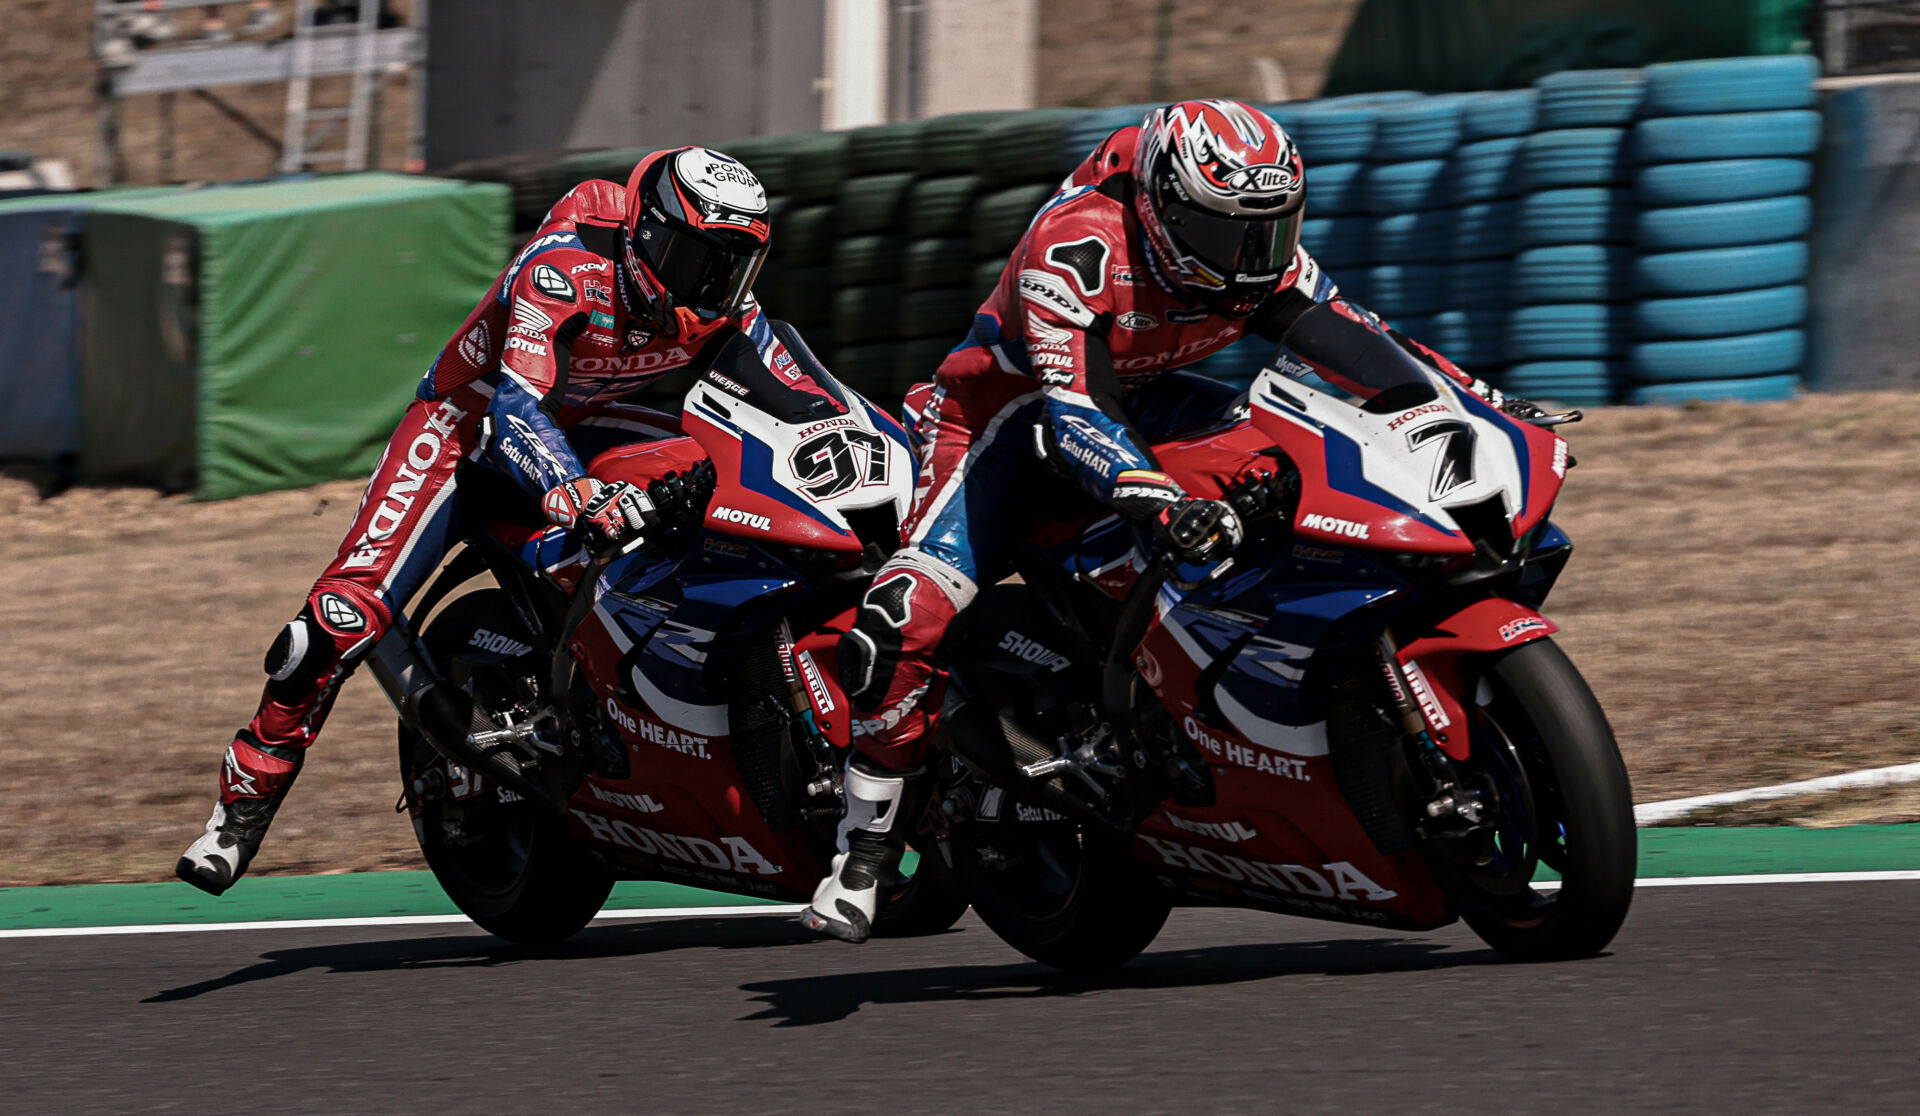 Iker Lecuona (7) and Xavi Vierge (97) have extended their contracts with Honda for two more WorldSBK seasons. Photo courtesy Honda.